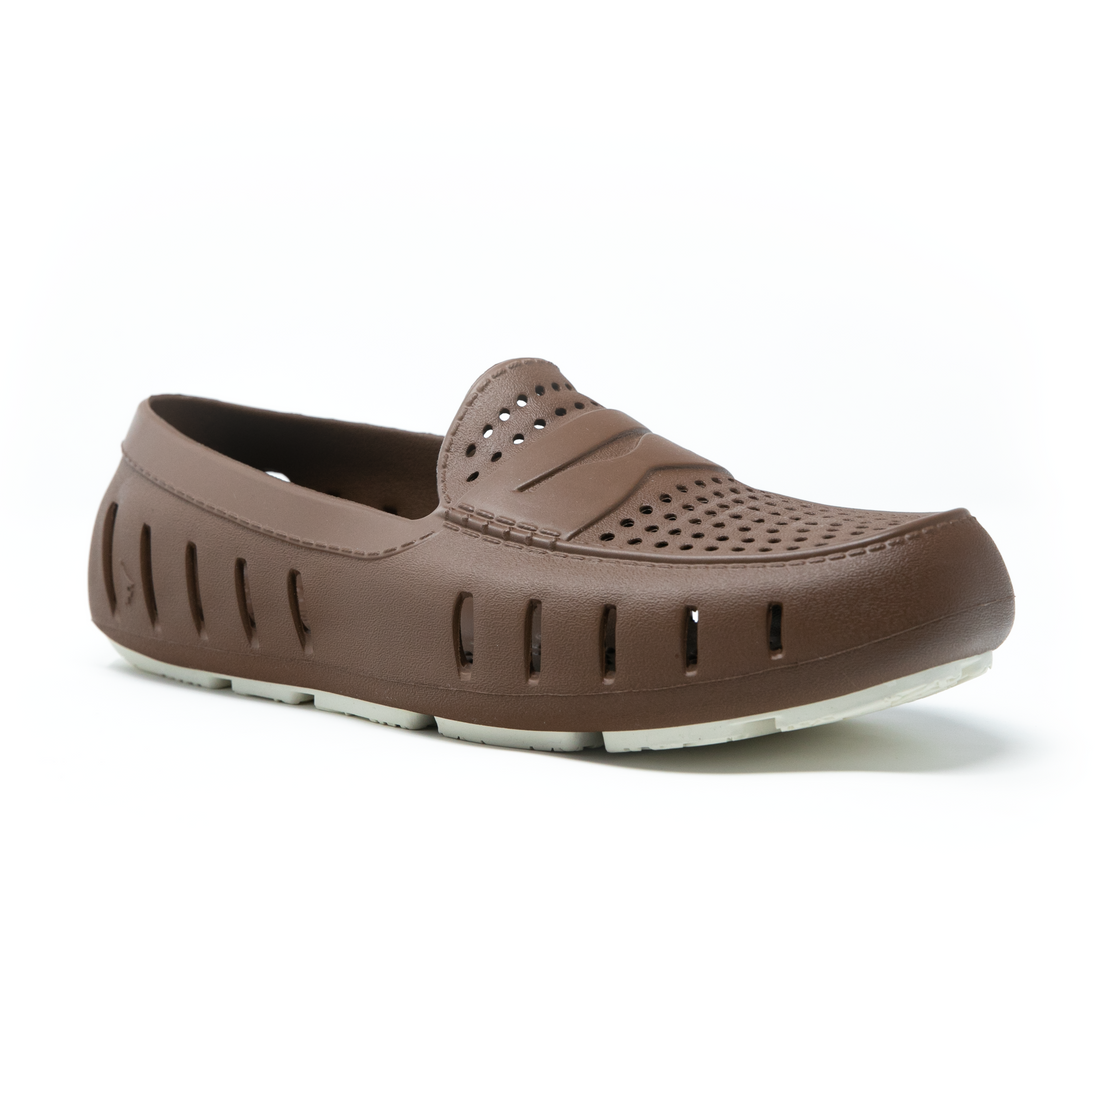 DRIFTWOOD BROWN/COCONUT - MENS